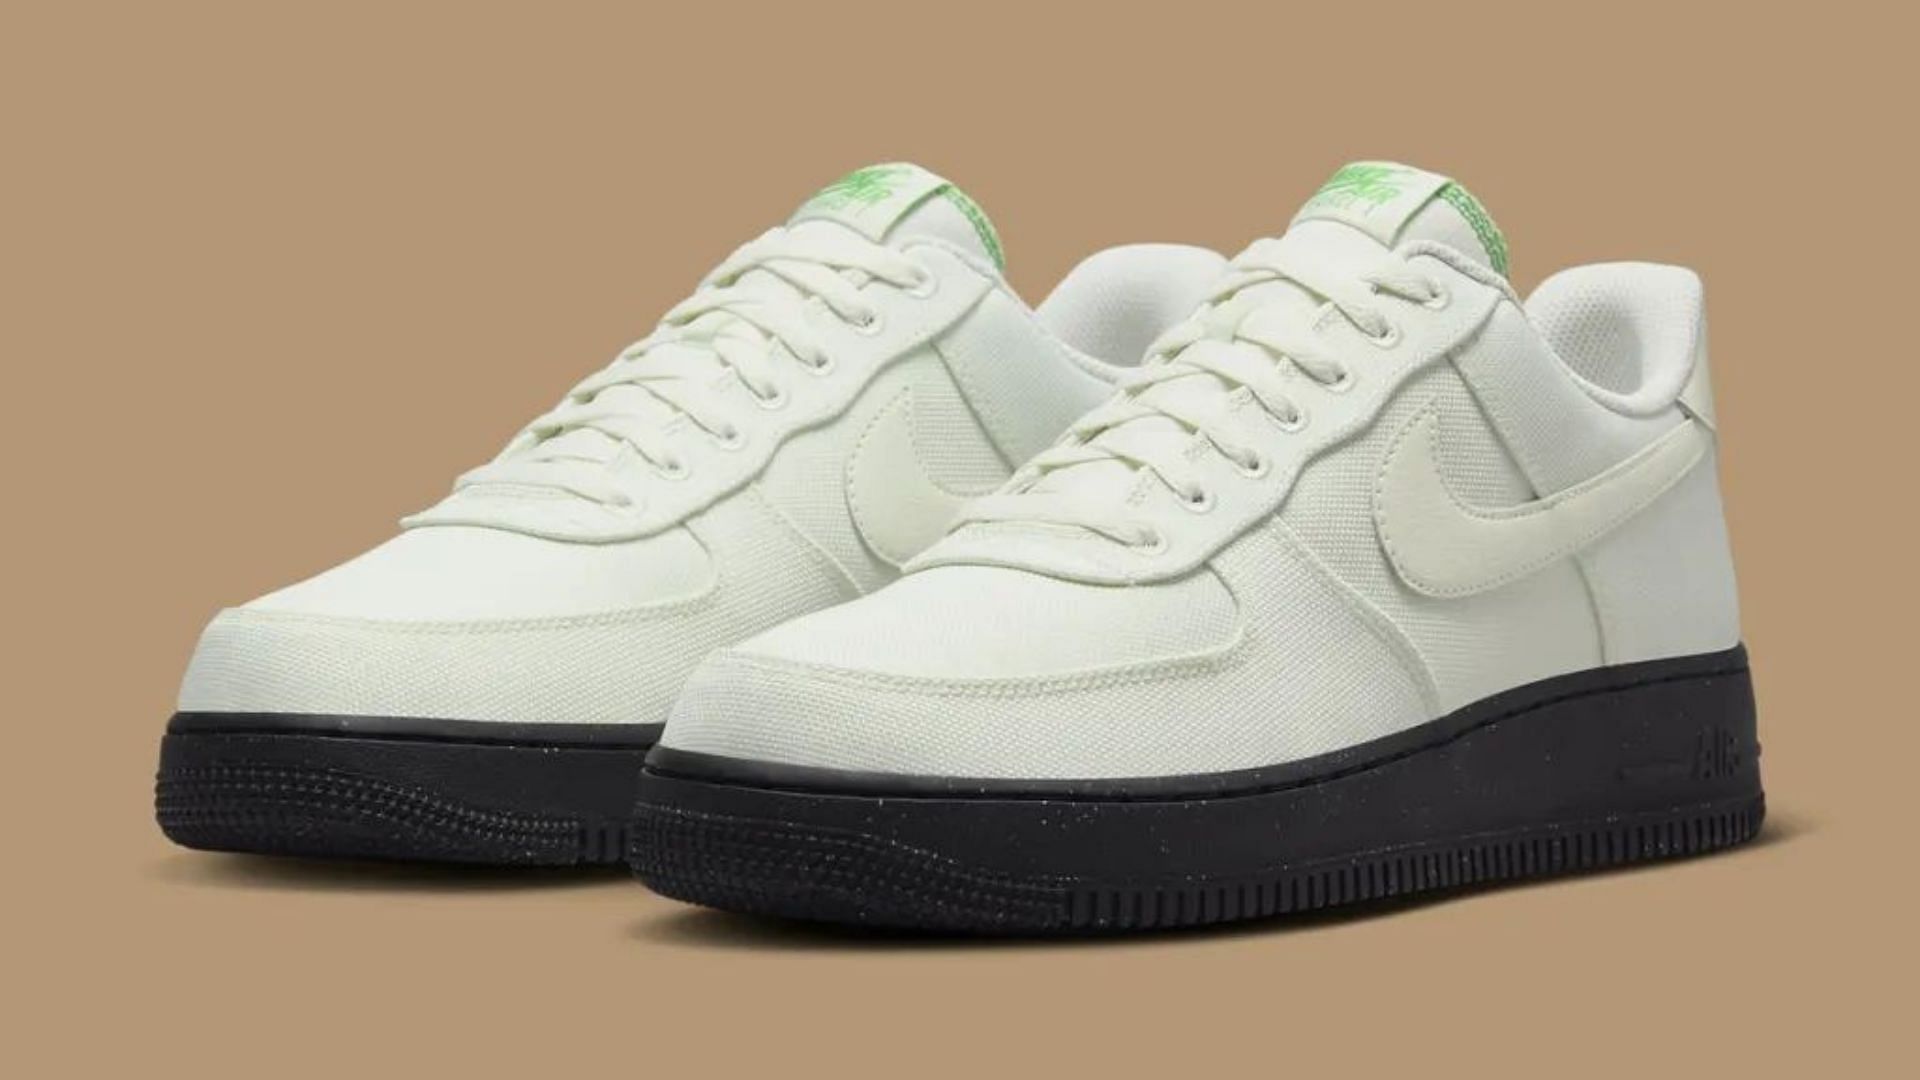 Nike Air Force 1 Low White Canvas shoes (Image via Nike)